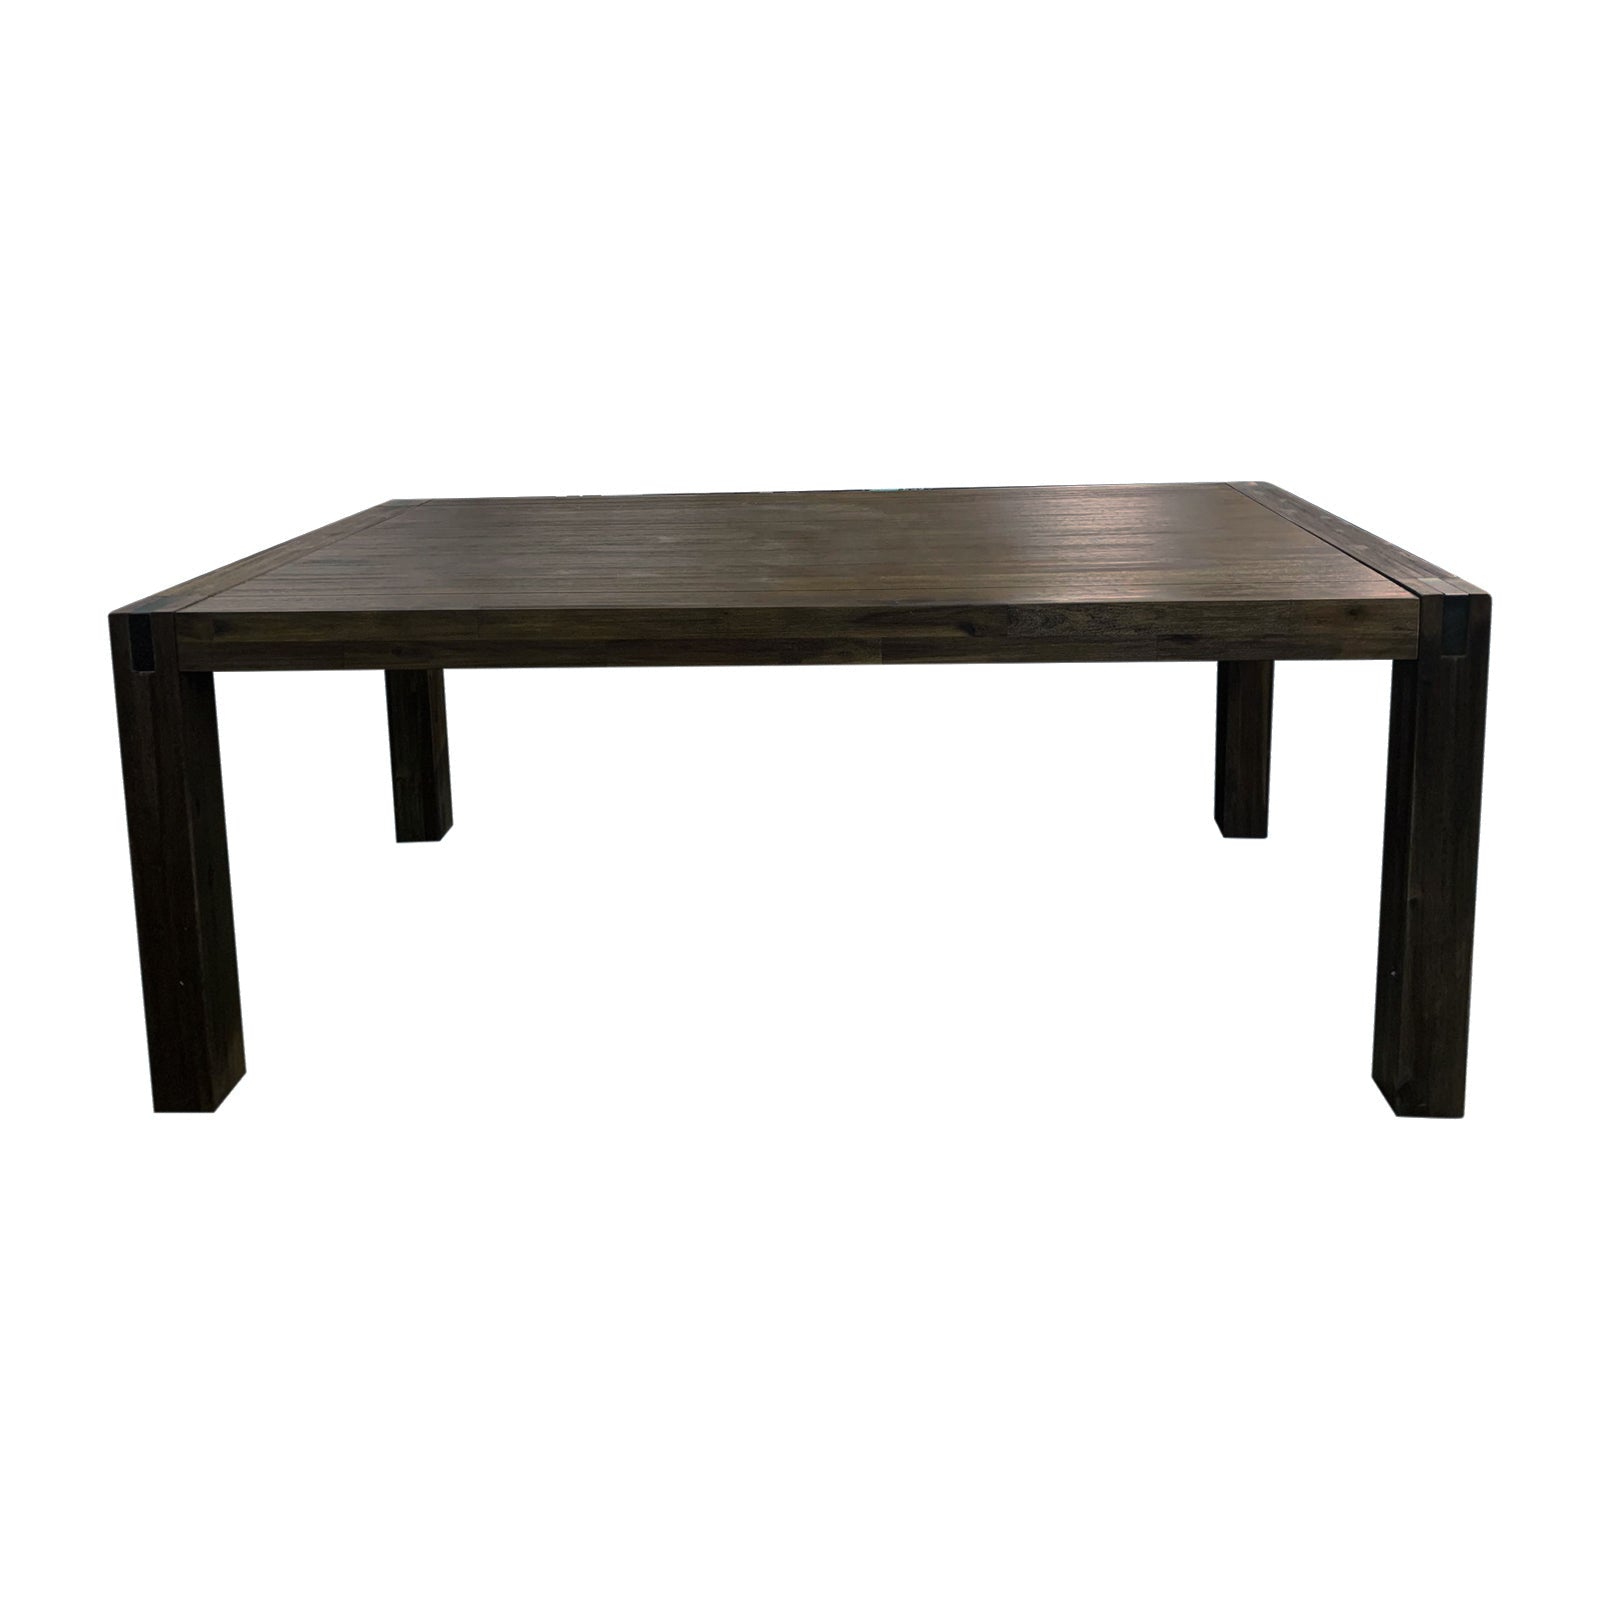 Dining Table 210cm Large Size with Solid Acacia Wooden Base in Chocolate Colour - SILBERSHELL